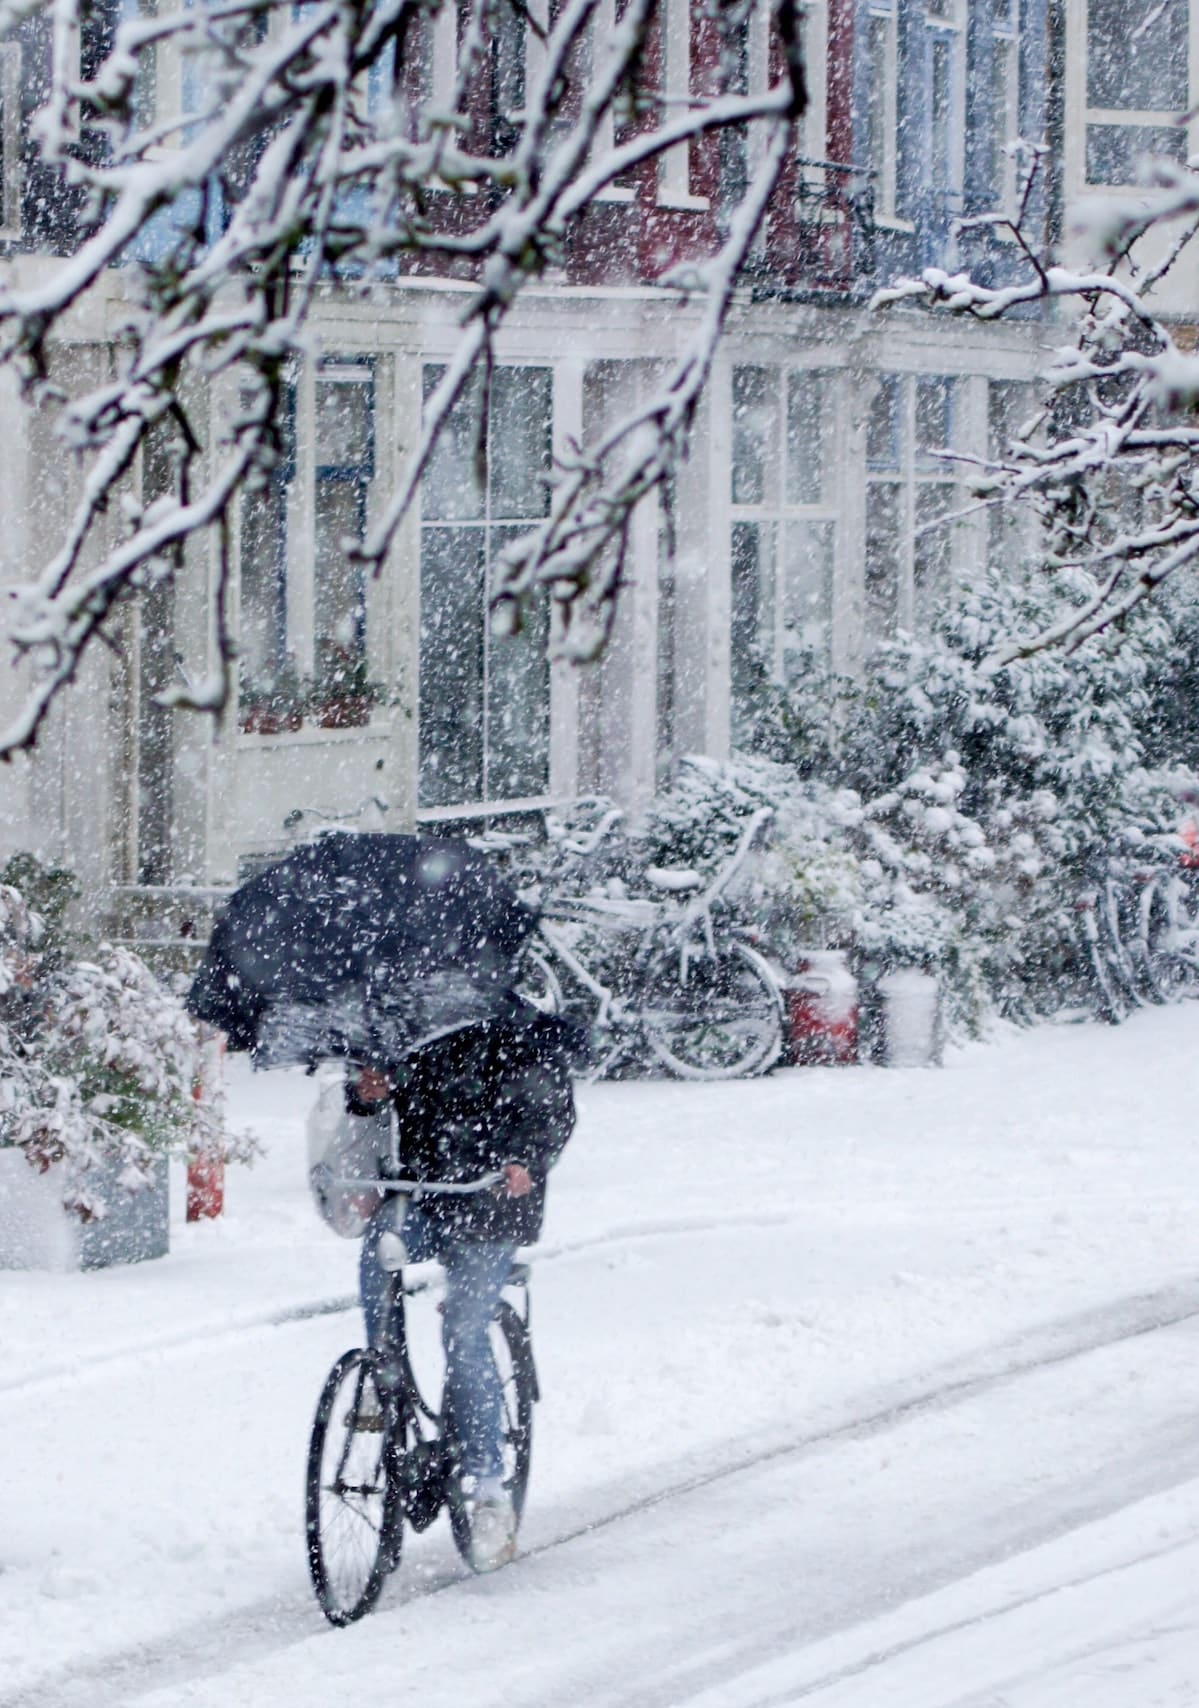 A cyclist carrying an umbrella riding in the snow.